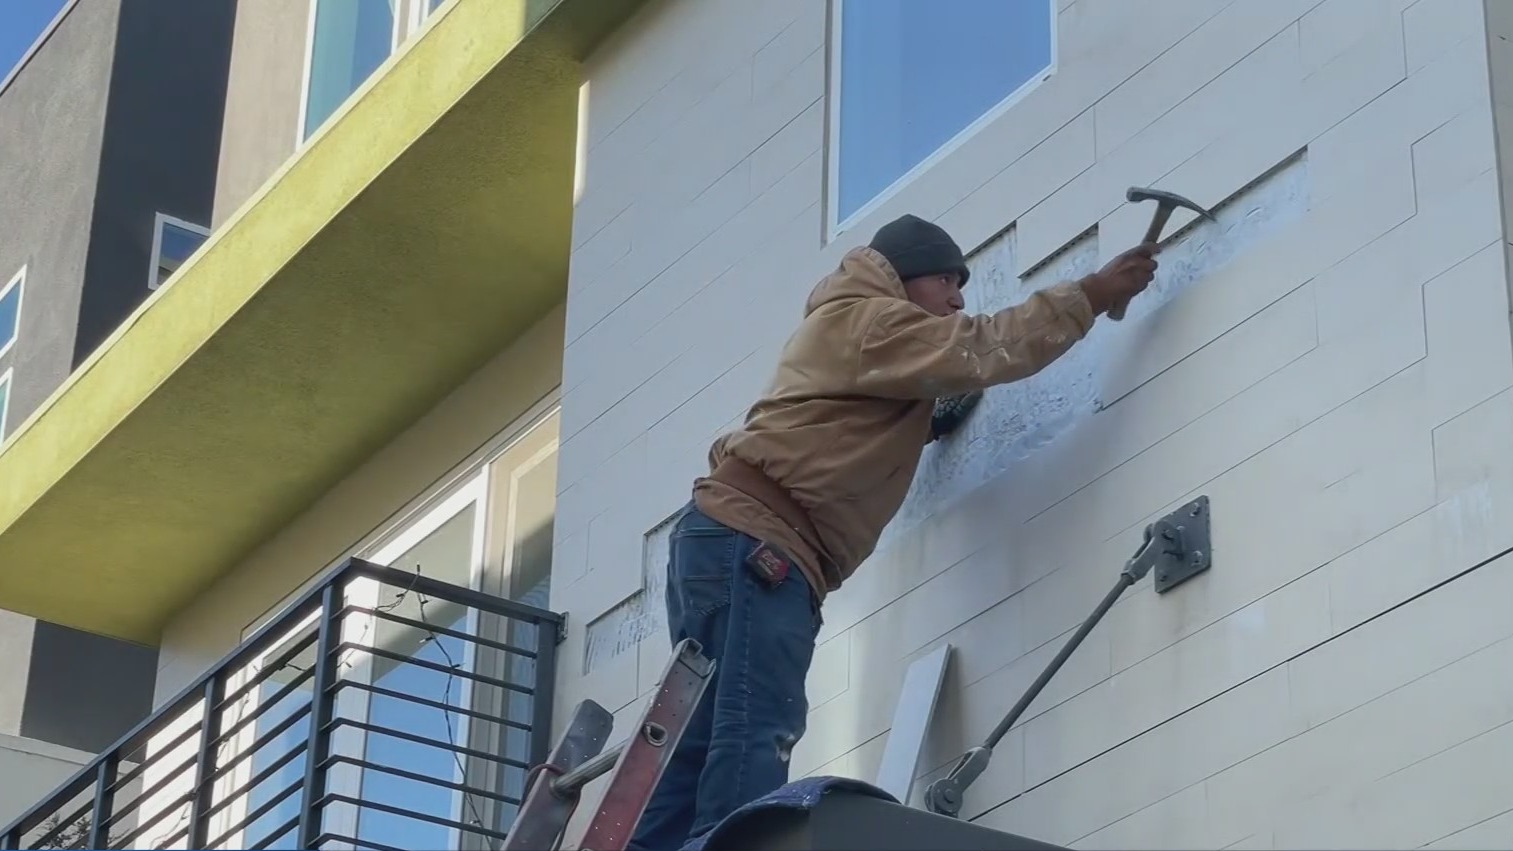 Repairs being made to homes in San Jose's Communications Hill neighborhood after tiles began falling, January 10, 2022. (CBS)